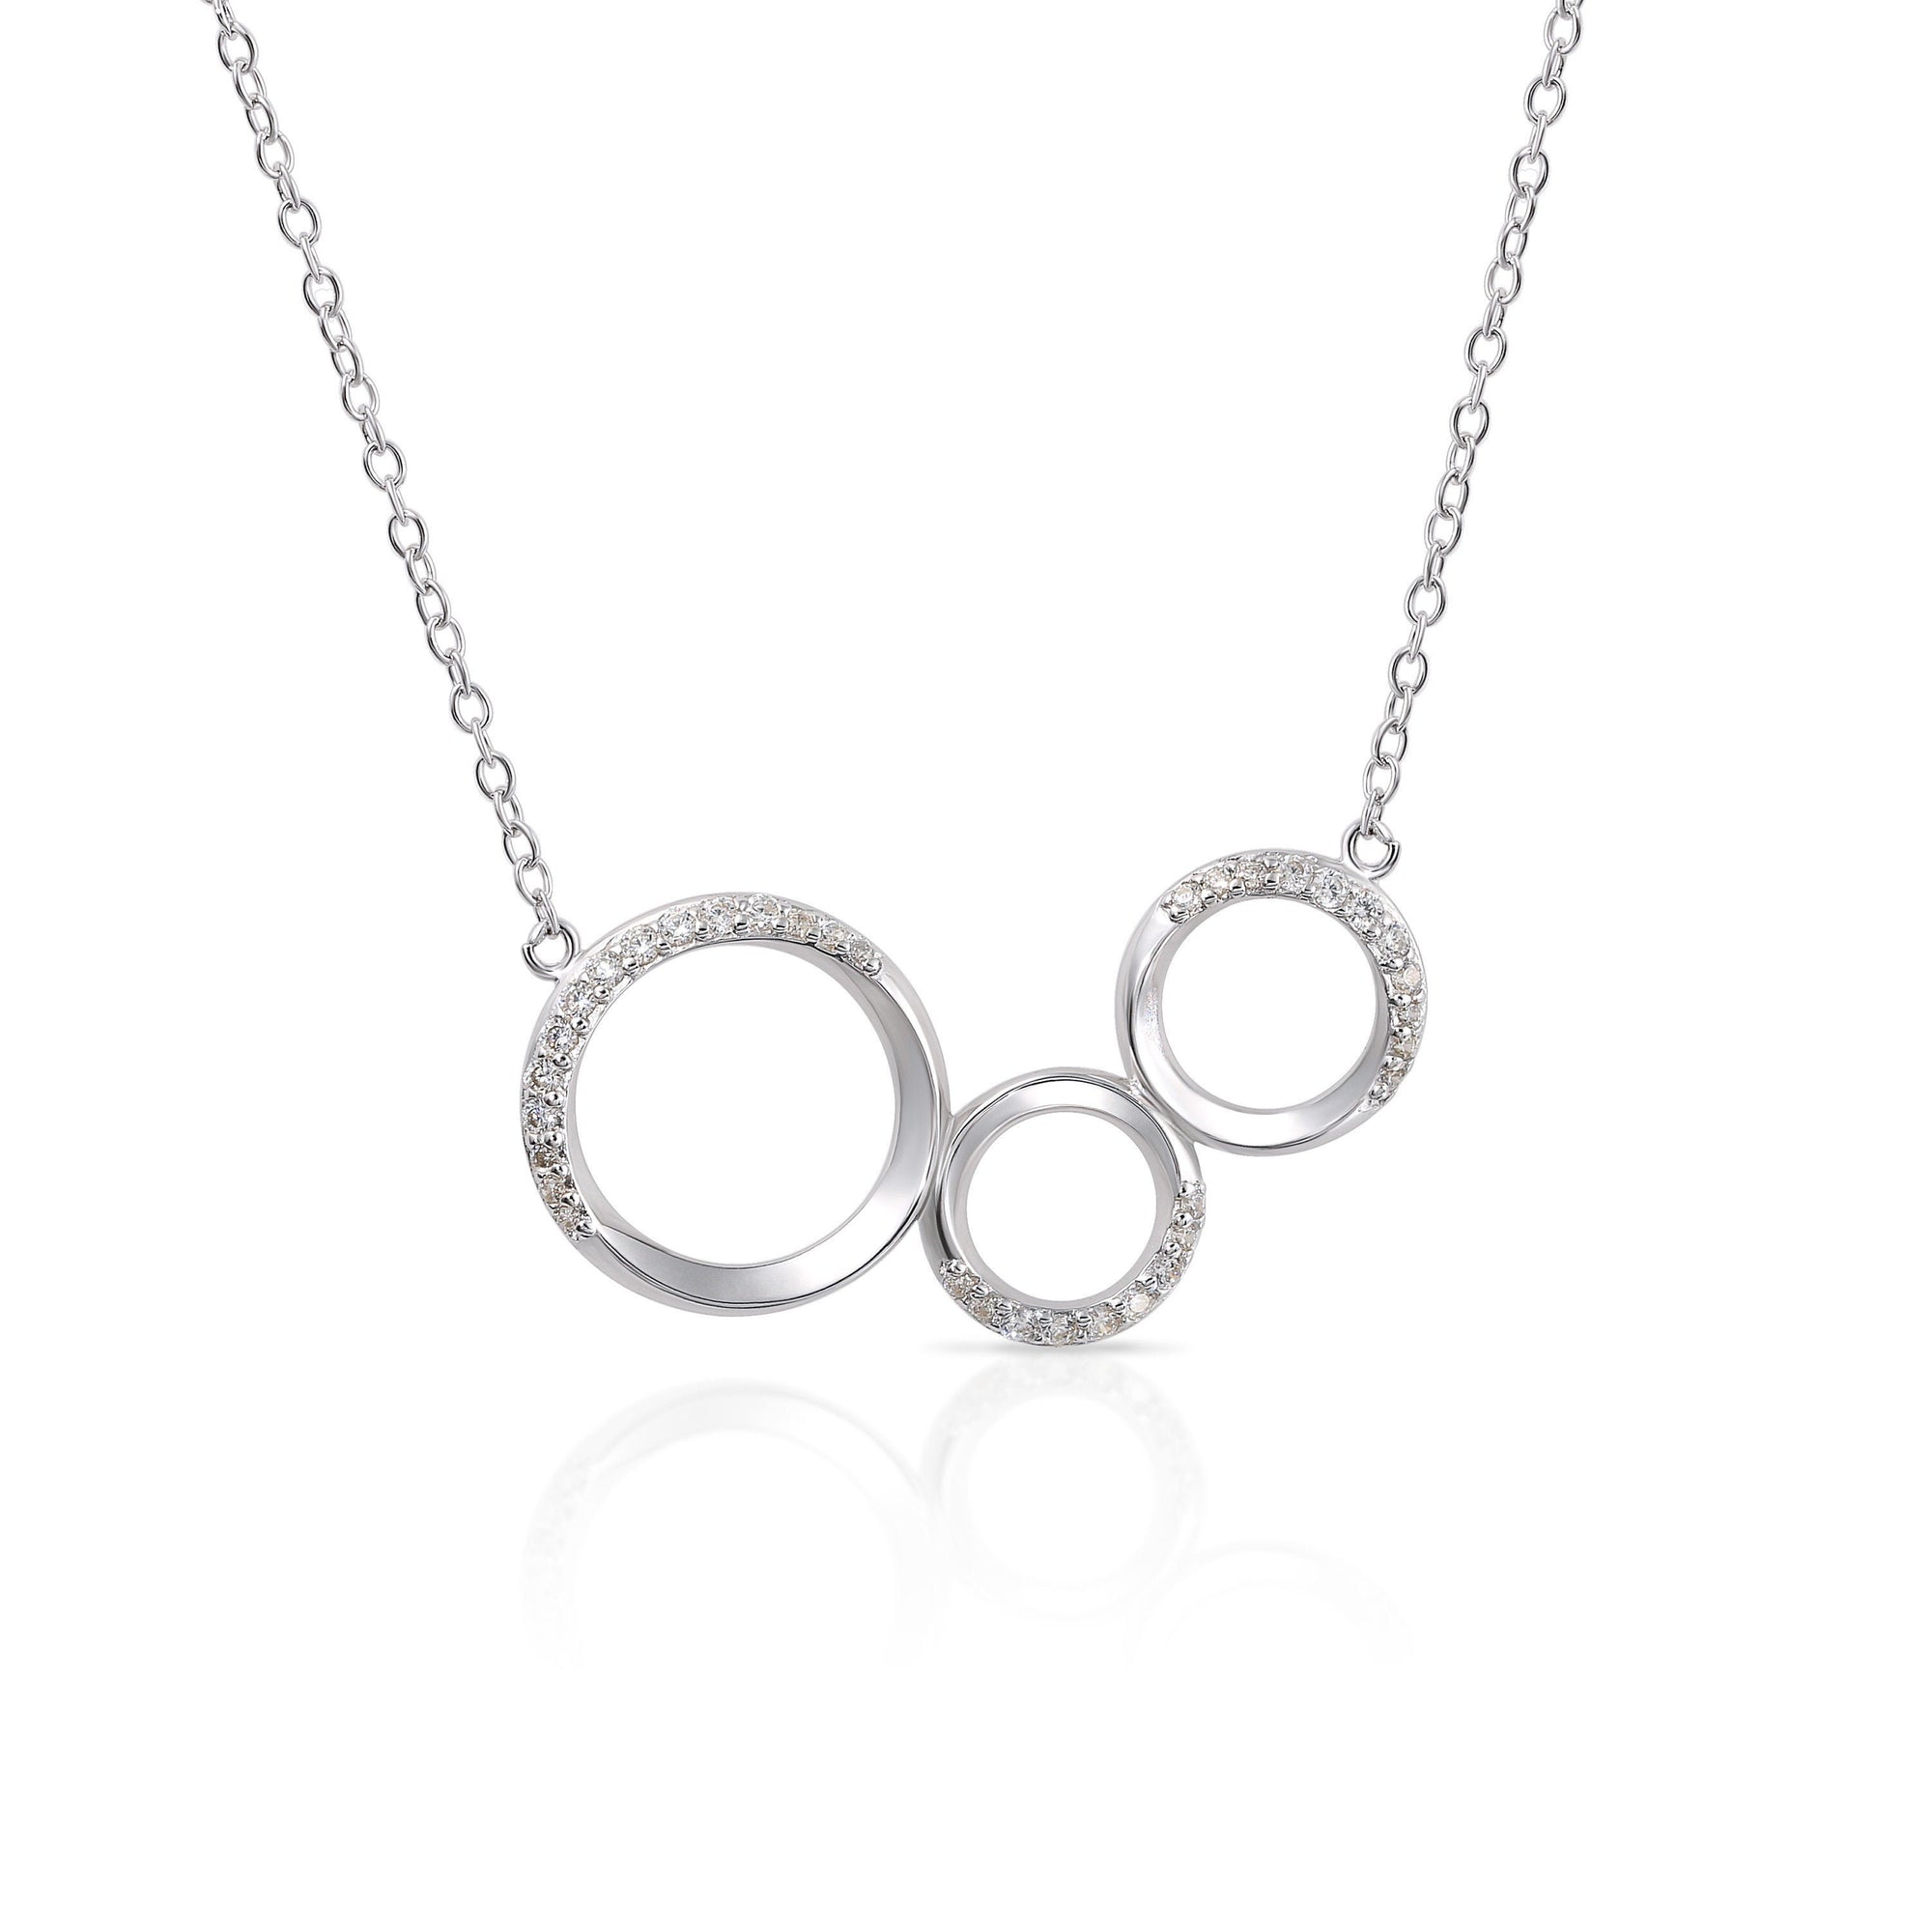 CZ Connected Circles Necklace in Sterling Silver